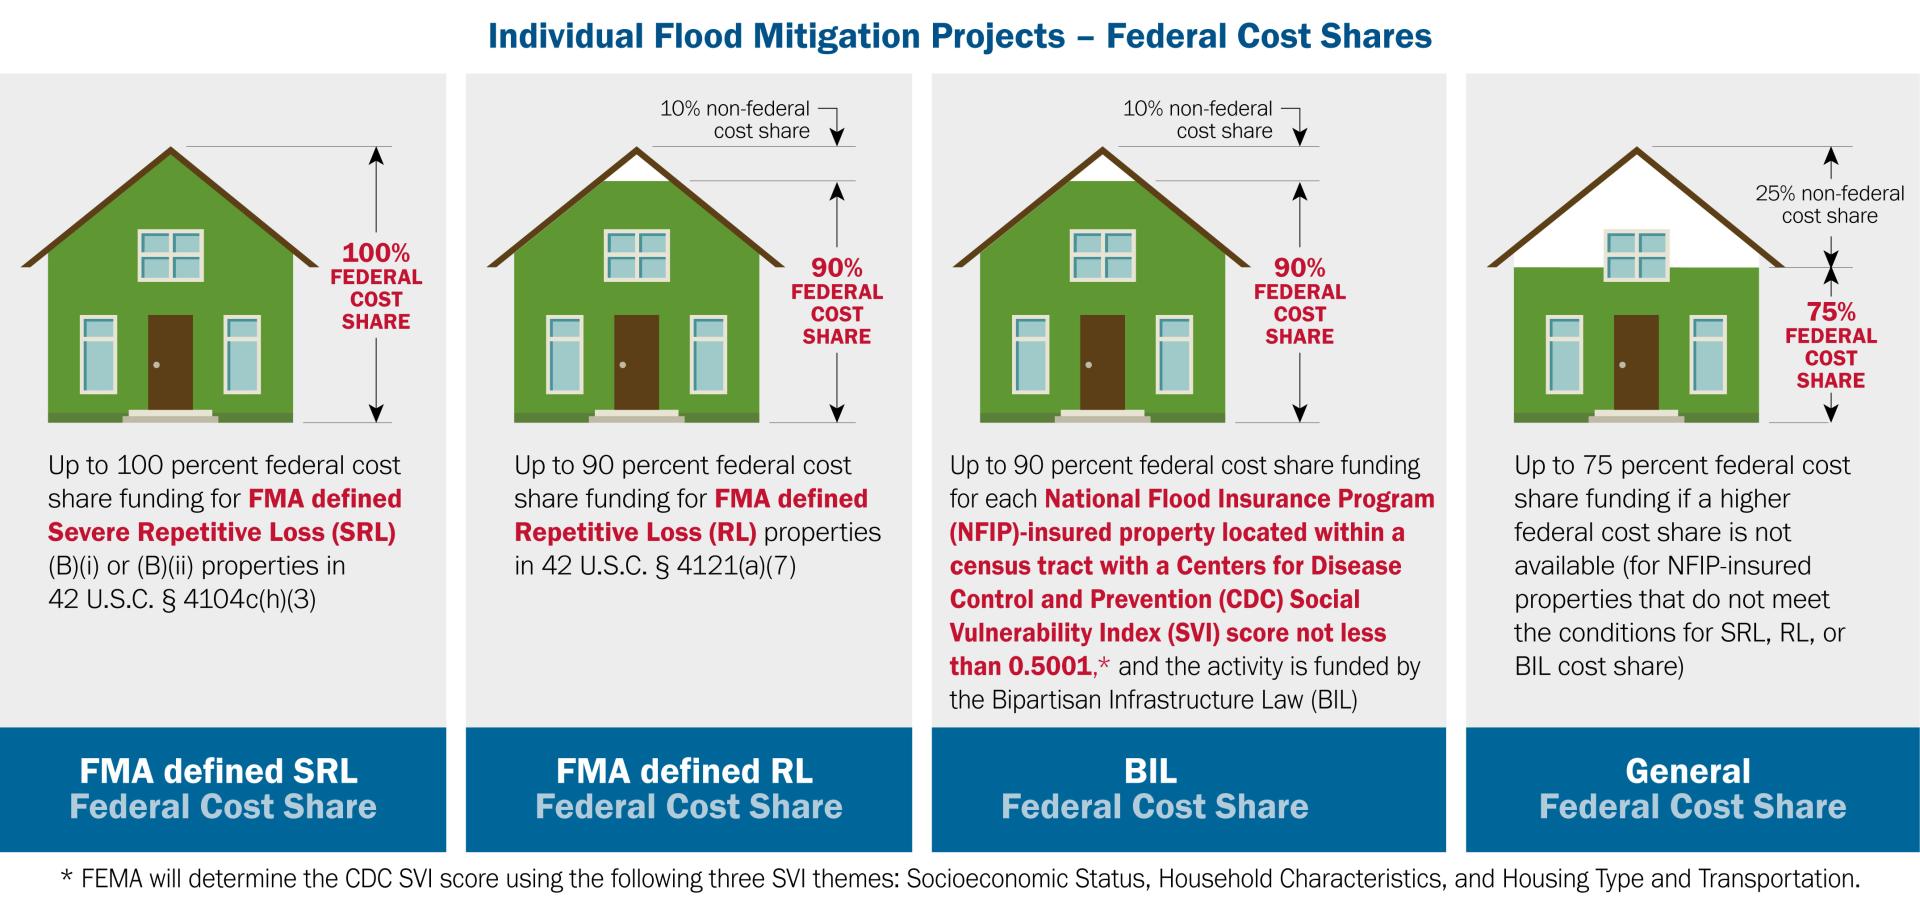 This is a graphic of FMA defined SRL Federal Cost Share, RL Federal Cost Share, BIL Federal Cost Share, and General Federal Cost Share